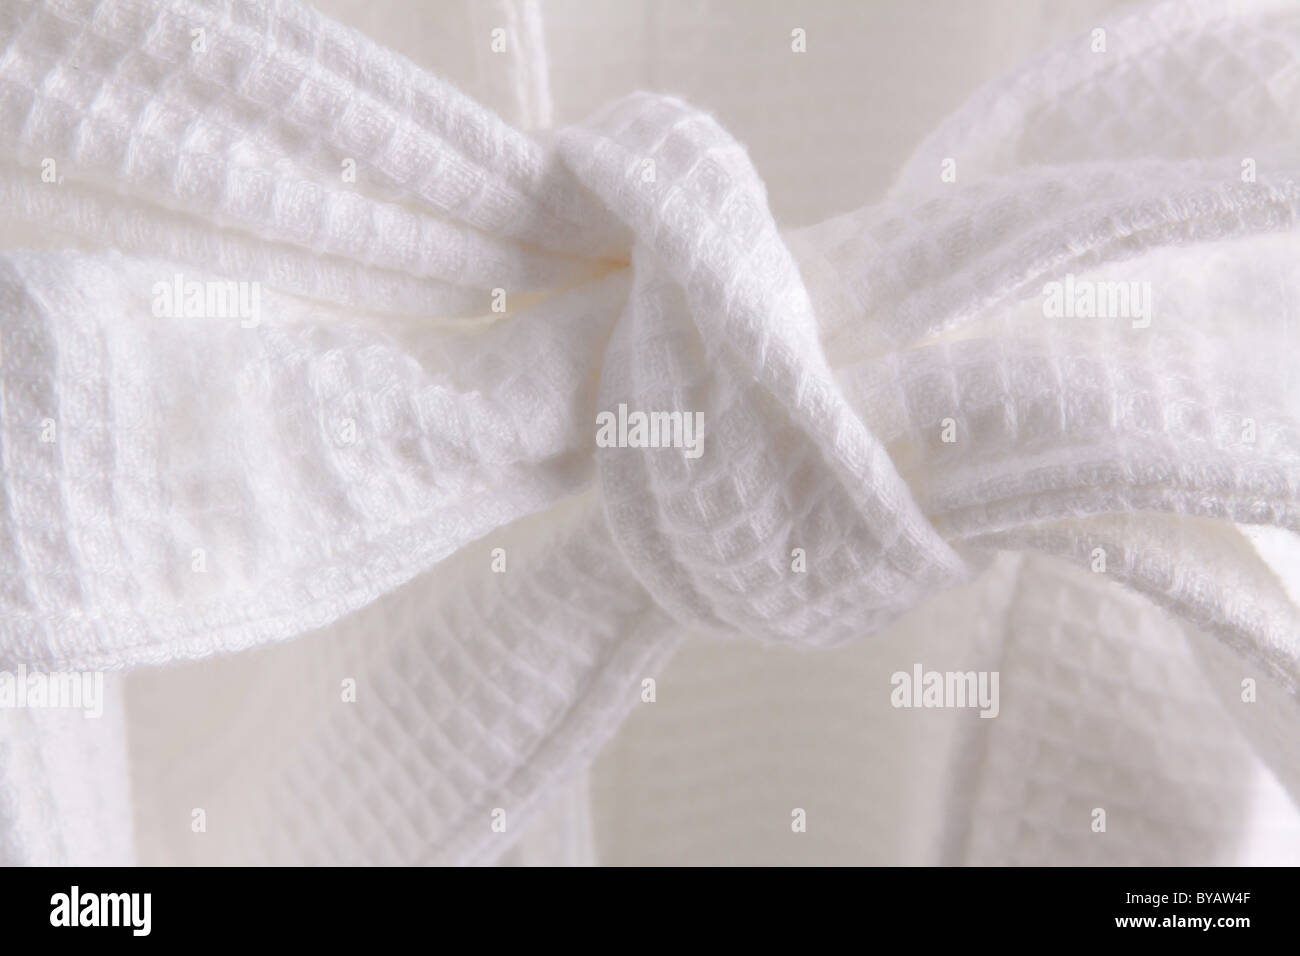 White dressing gown belt tied in a knot detail giving a feeling of luxuaty relaxation illustration or concept Stock Photo